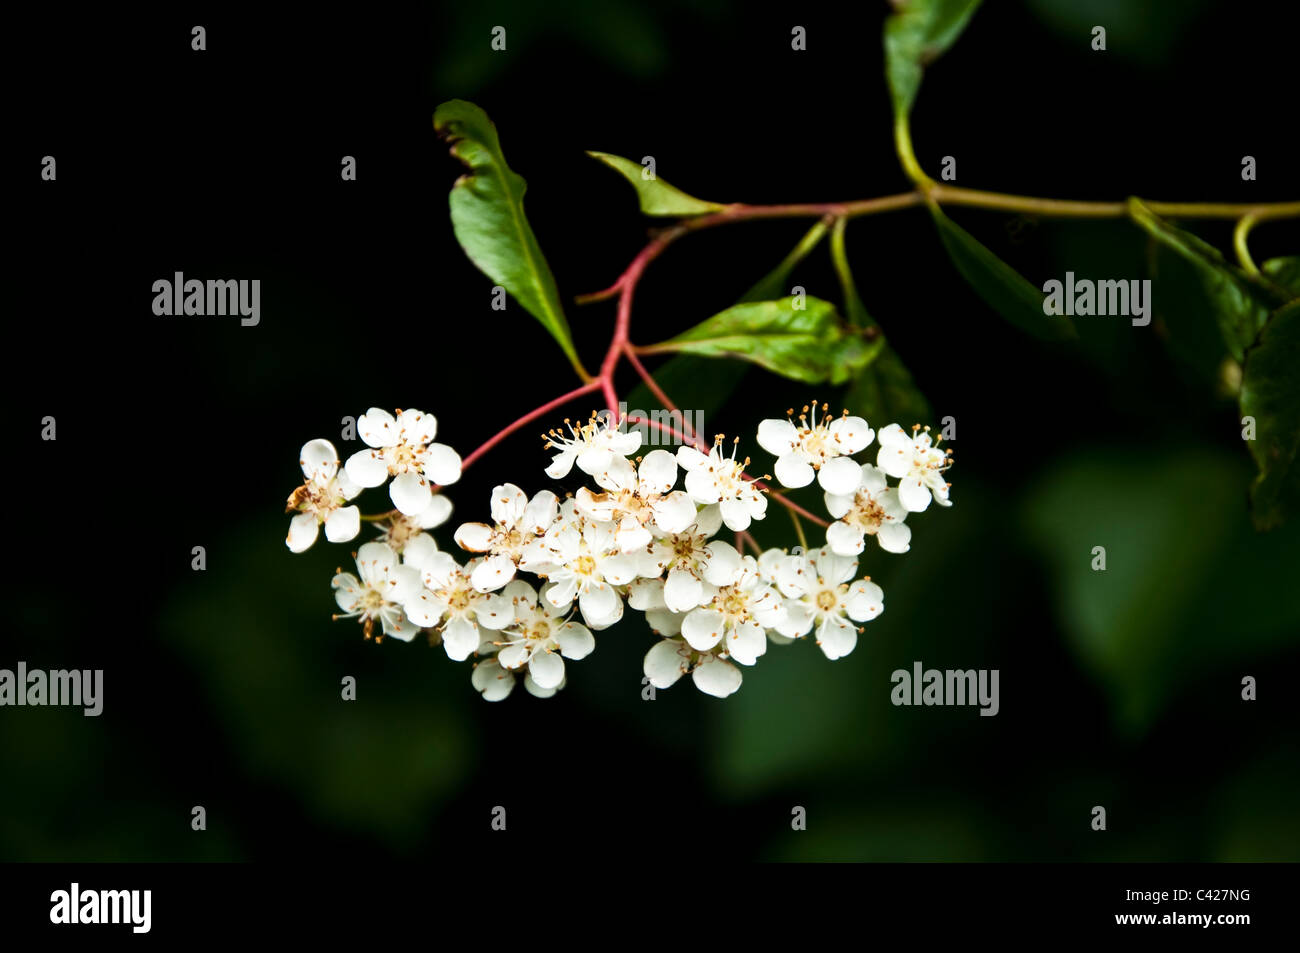 Pyracantha flowers against a dark natural background. UK Stock Photo